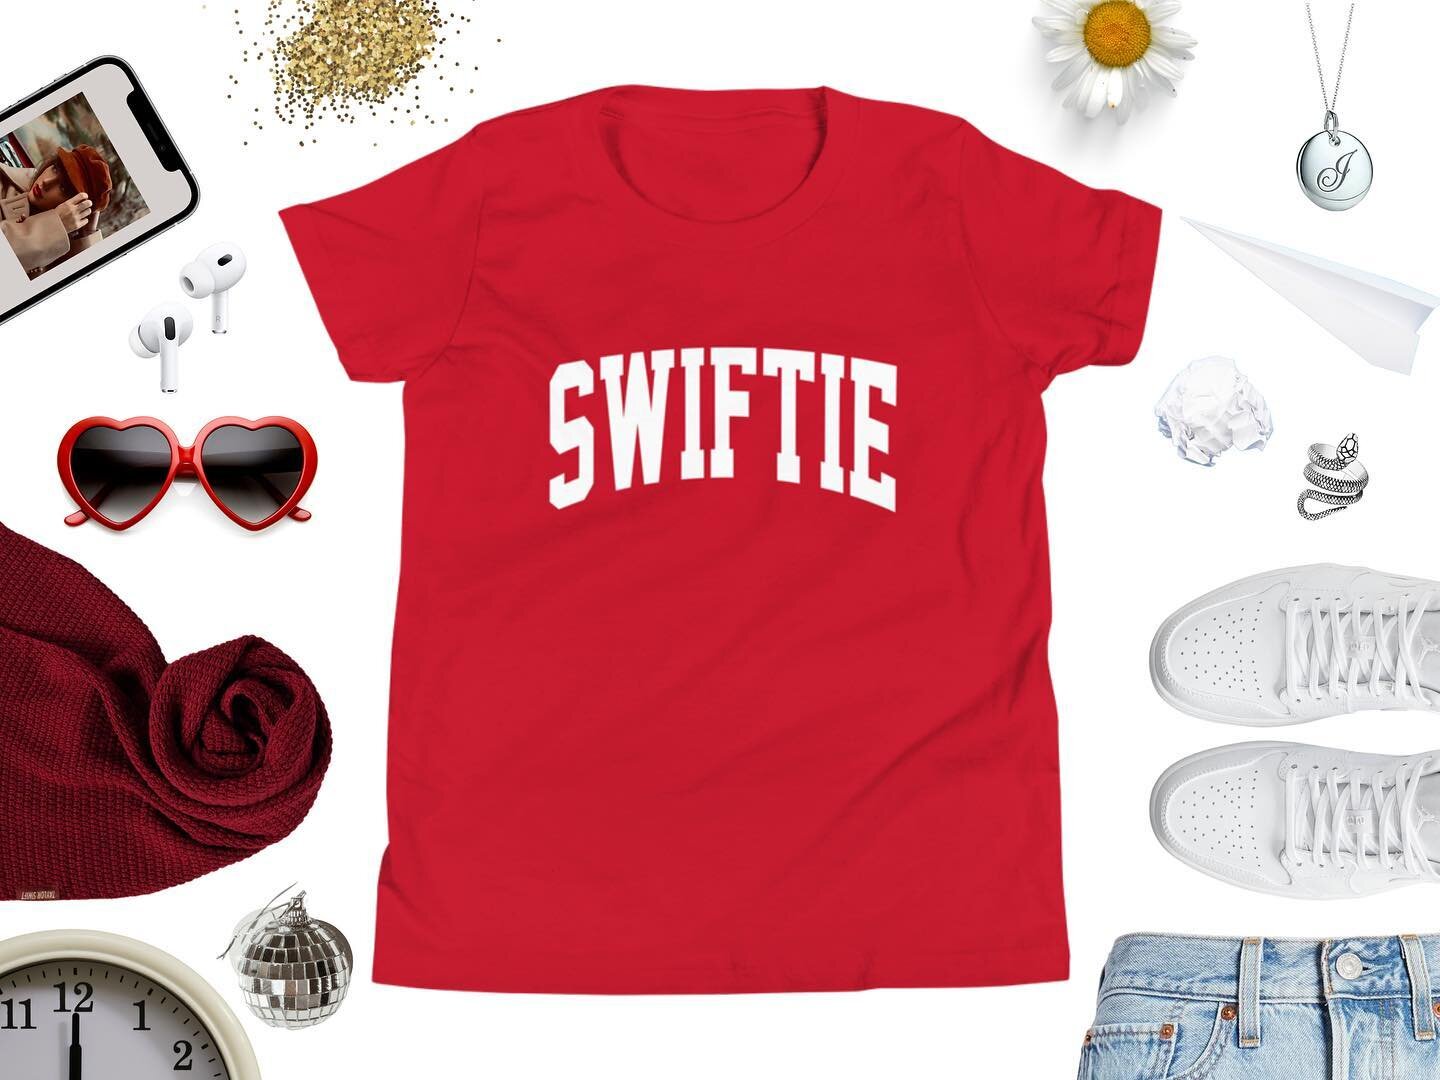 YOUTH SIZES in our Varisty Swiftie Tee are now available due to popular request! I was able to source 10 short sleeve shirts in my favorite brand and four long sleeved shirts. Can&rsquo;t wait to see all your little Swifties opening these on Christma